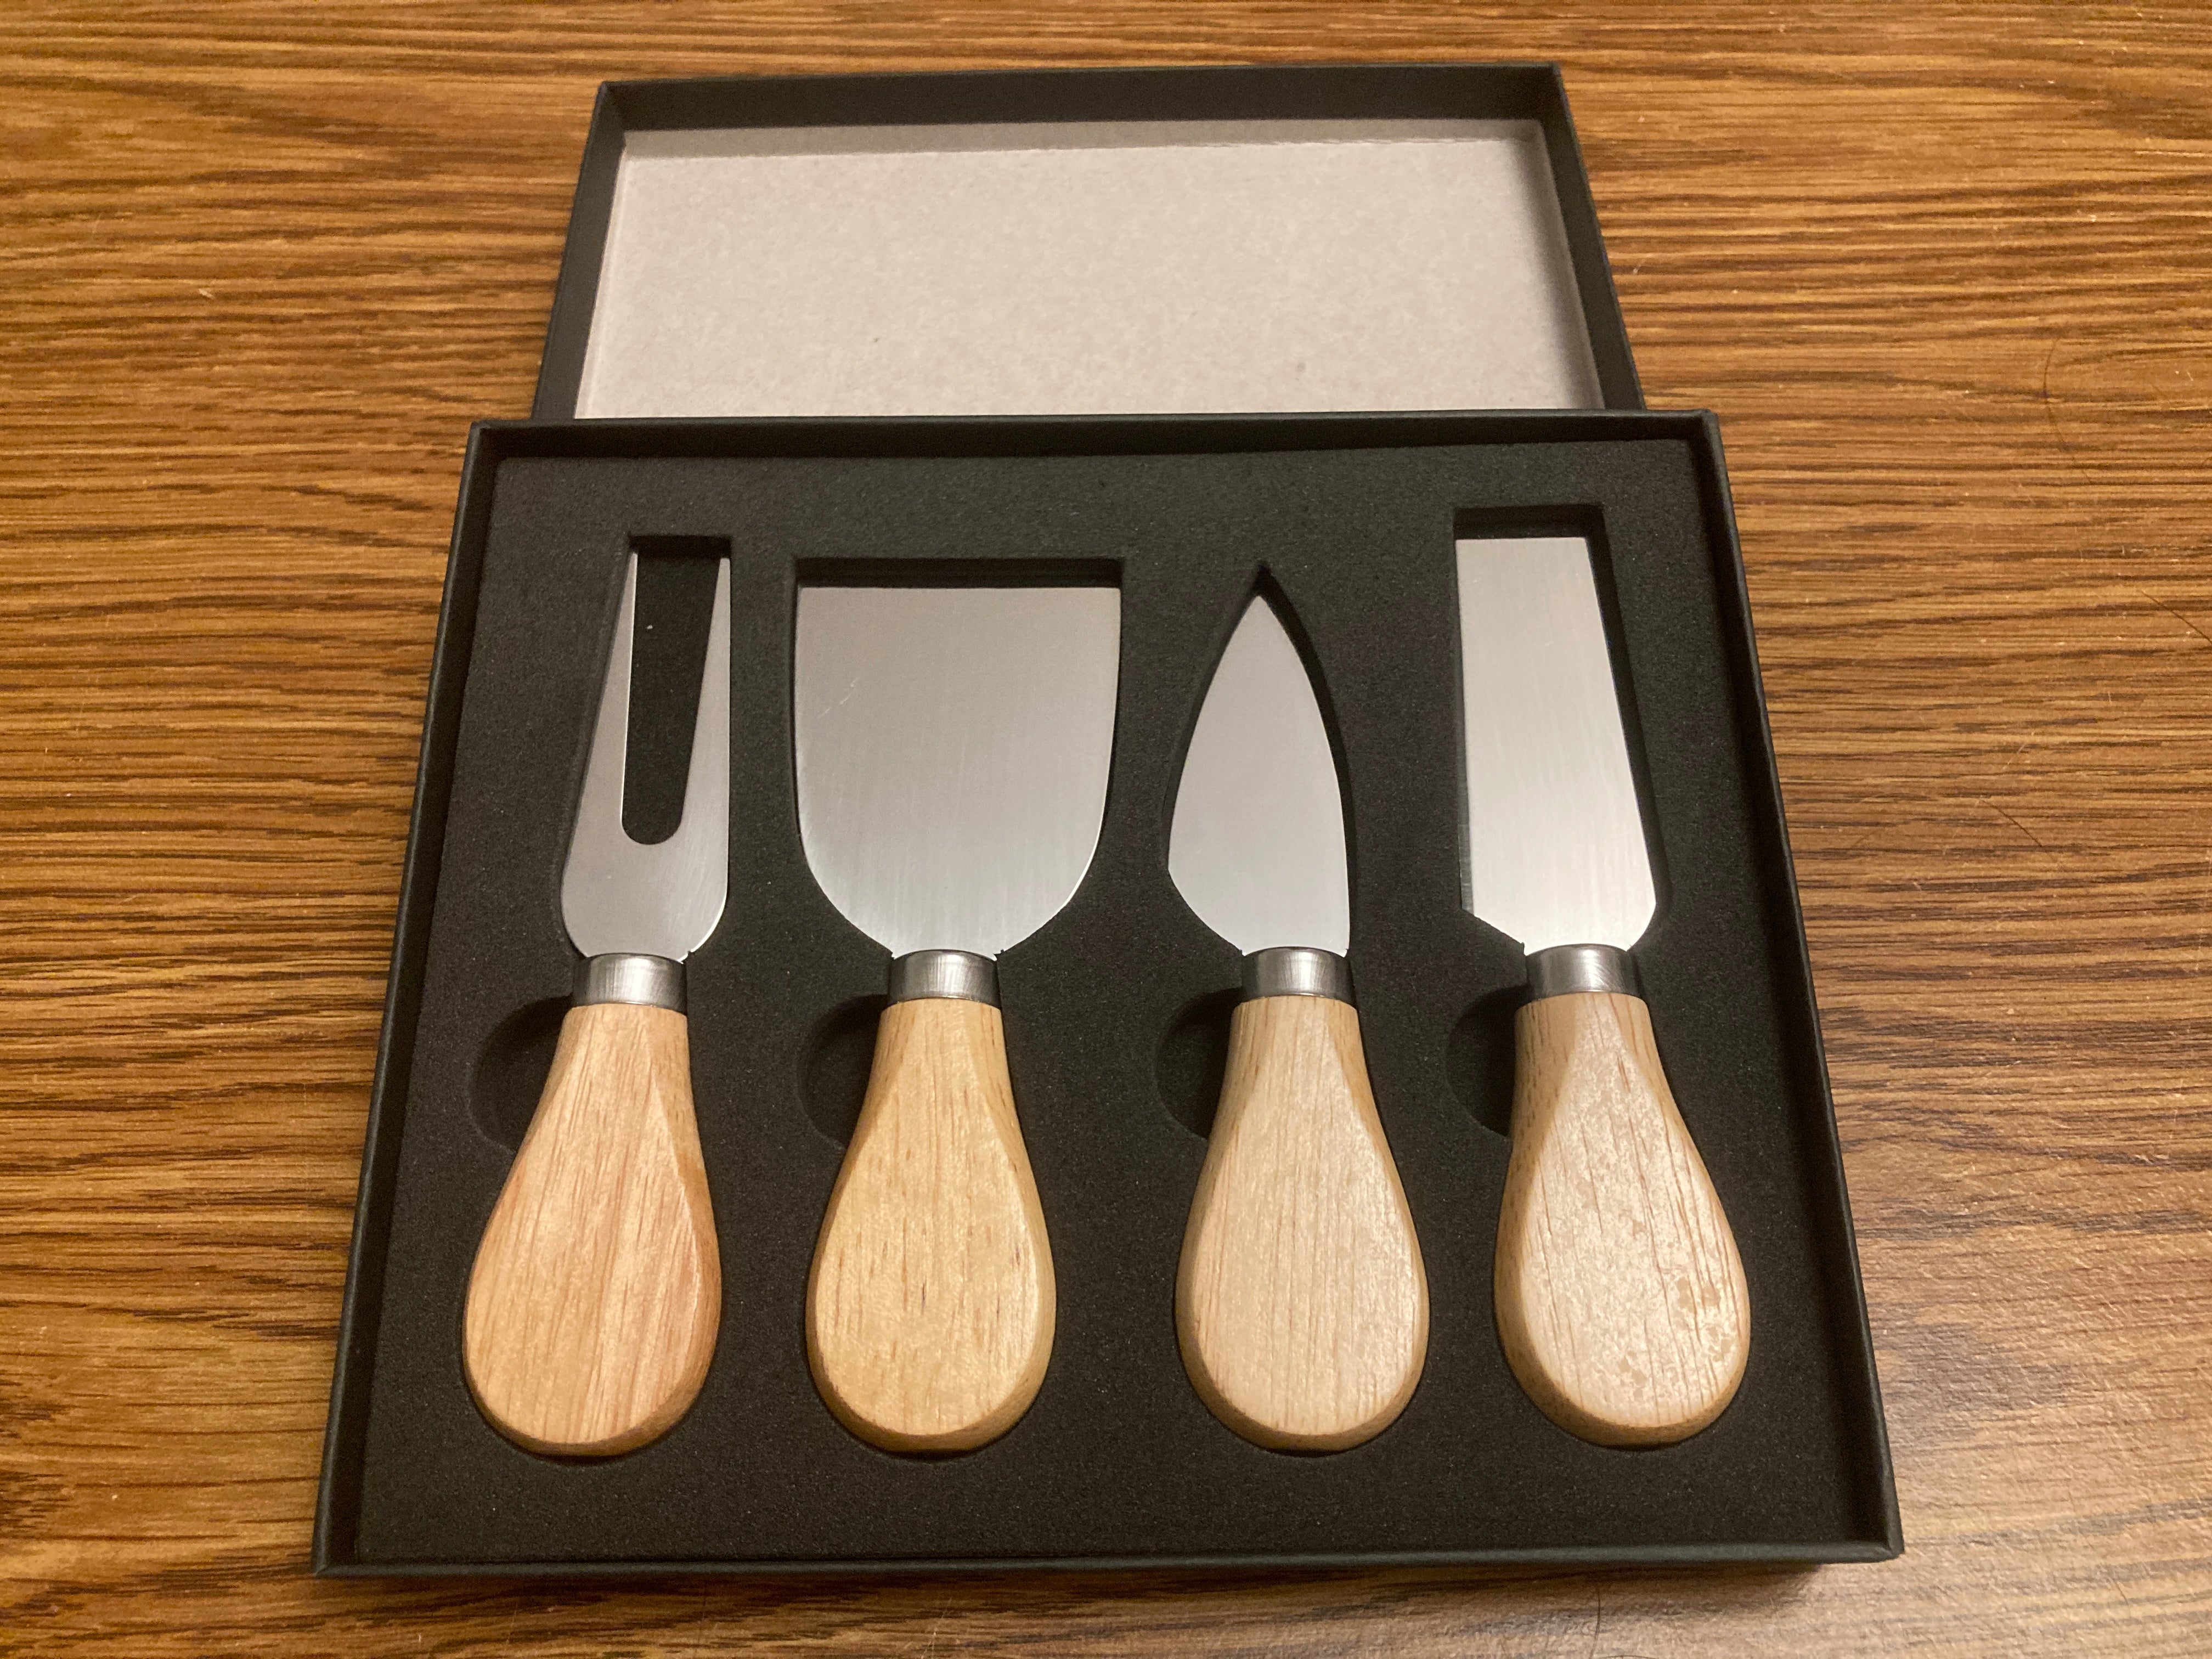 4-piece, stainless steel cheese knife-charcuterie gift set. This wooden handle cutlery gift set comes in it's own gift box.